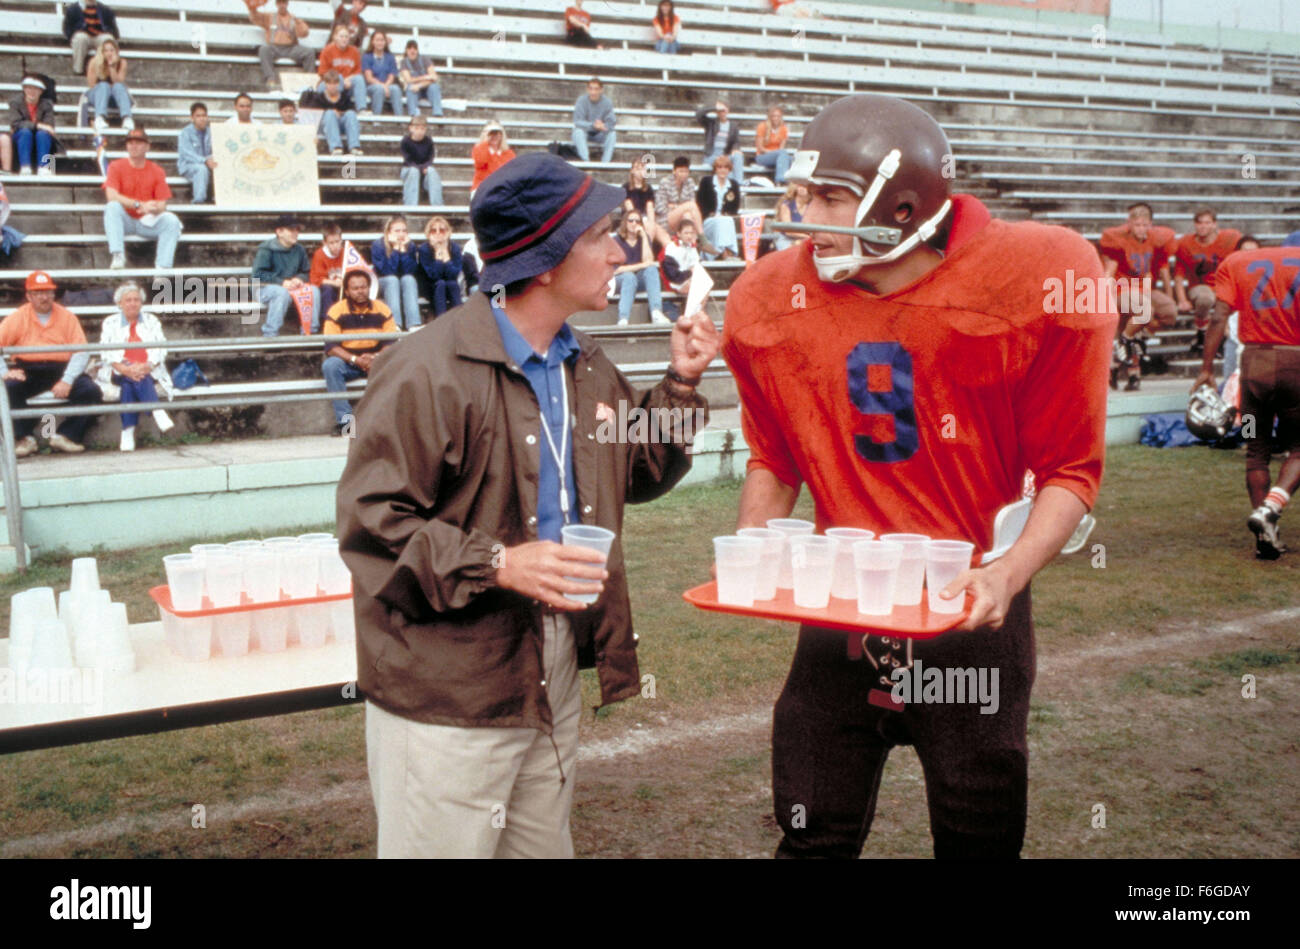 Nov 06, 1998; Orlando, FL, USA; HENRY WINKLER and ADAM SANDLER star as Coach Klein and Bobby Boucher in the comedy 'The Waterboy' directed by Frank Coraci. Stock Photo